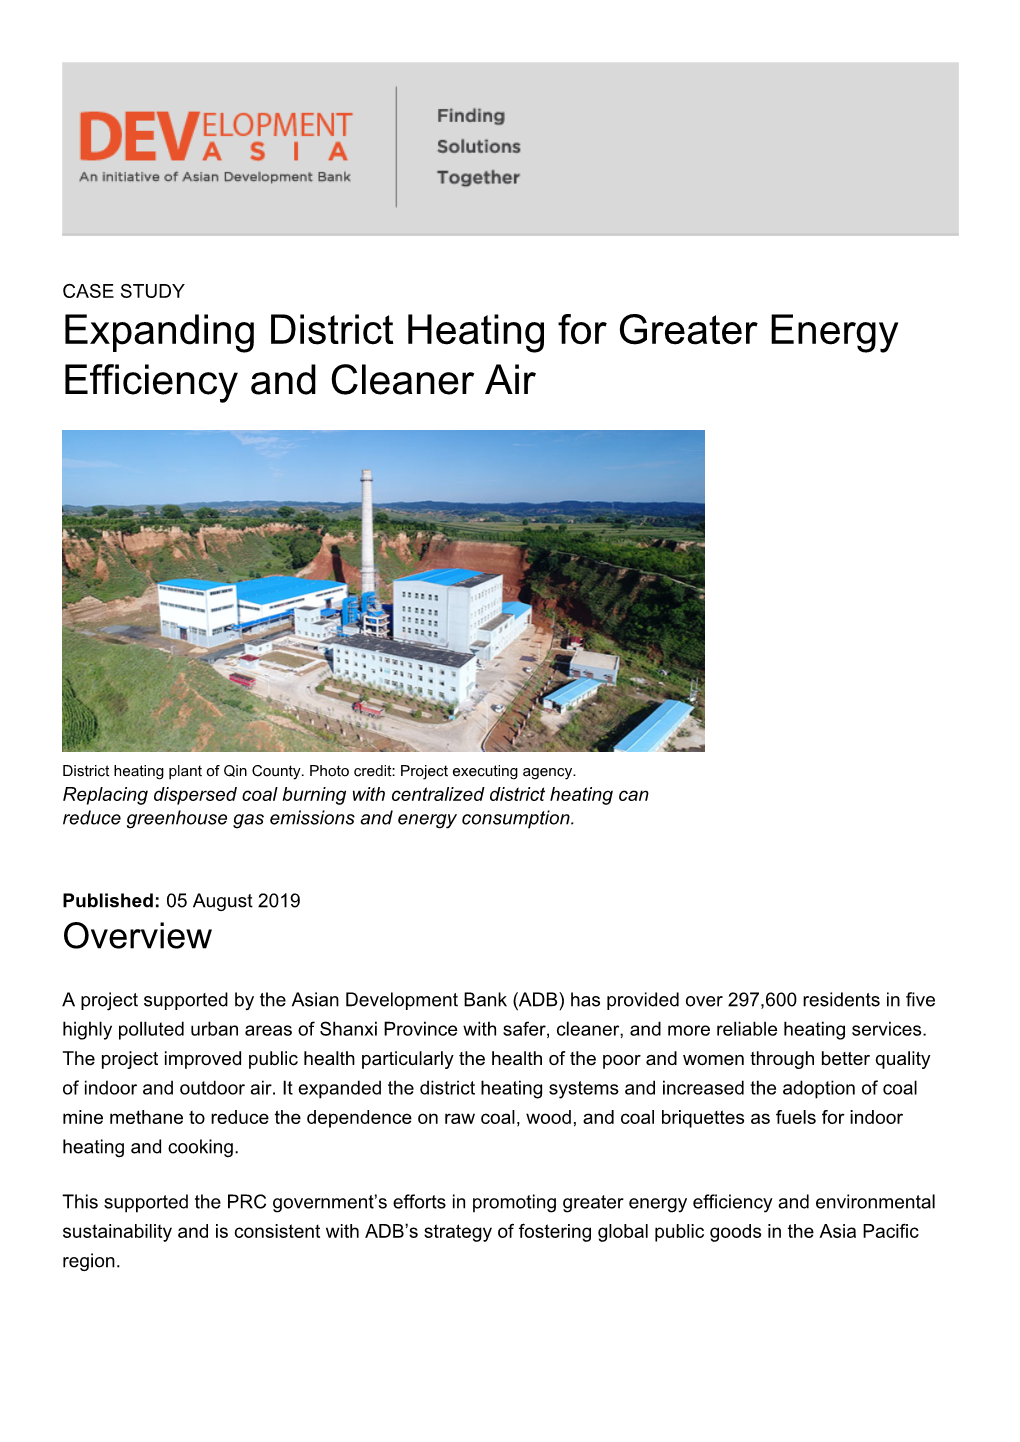 Expanding District Heating for Greater Energy Efficiency and Cleaner Air